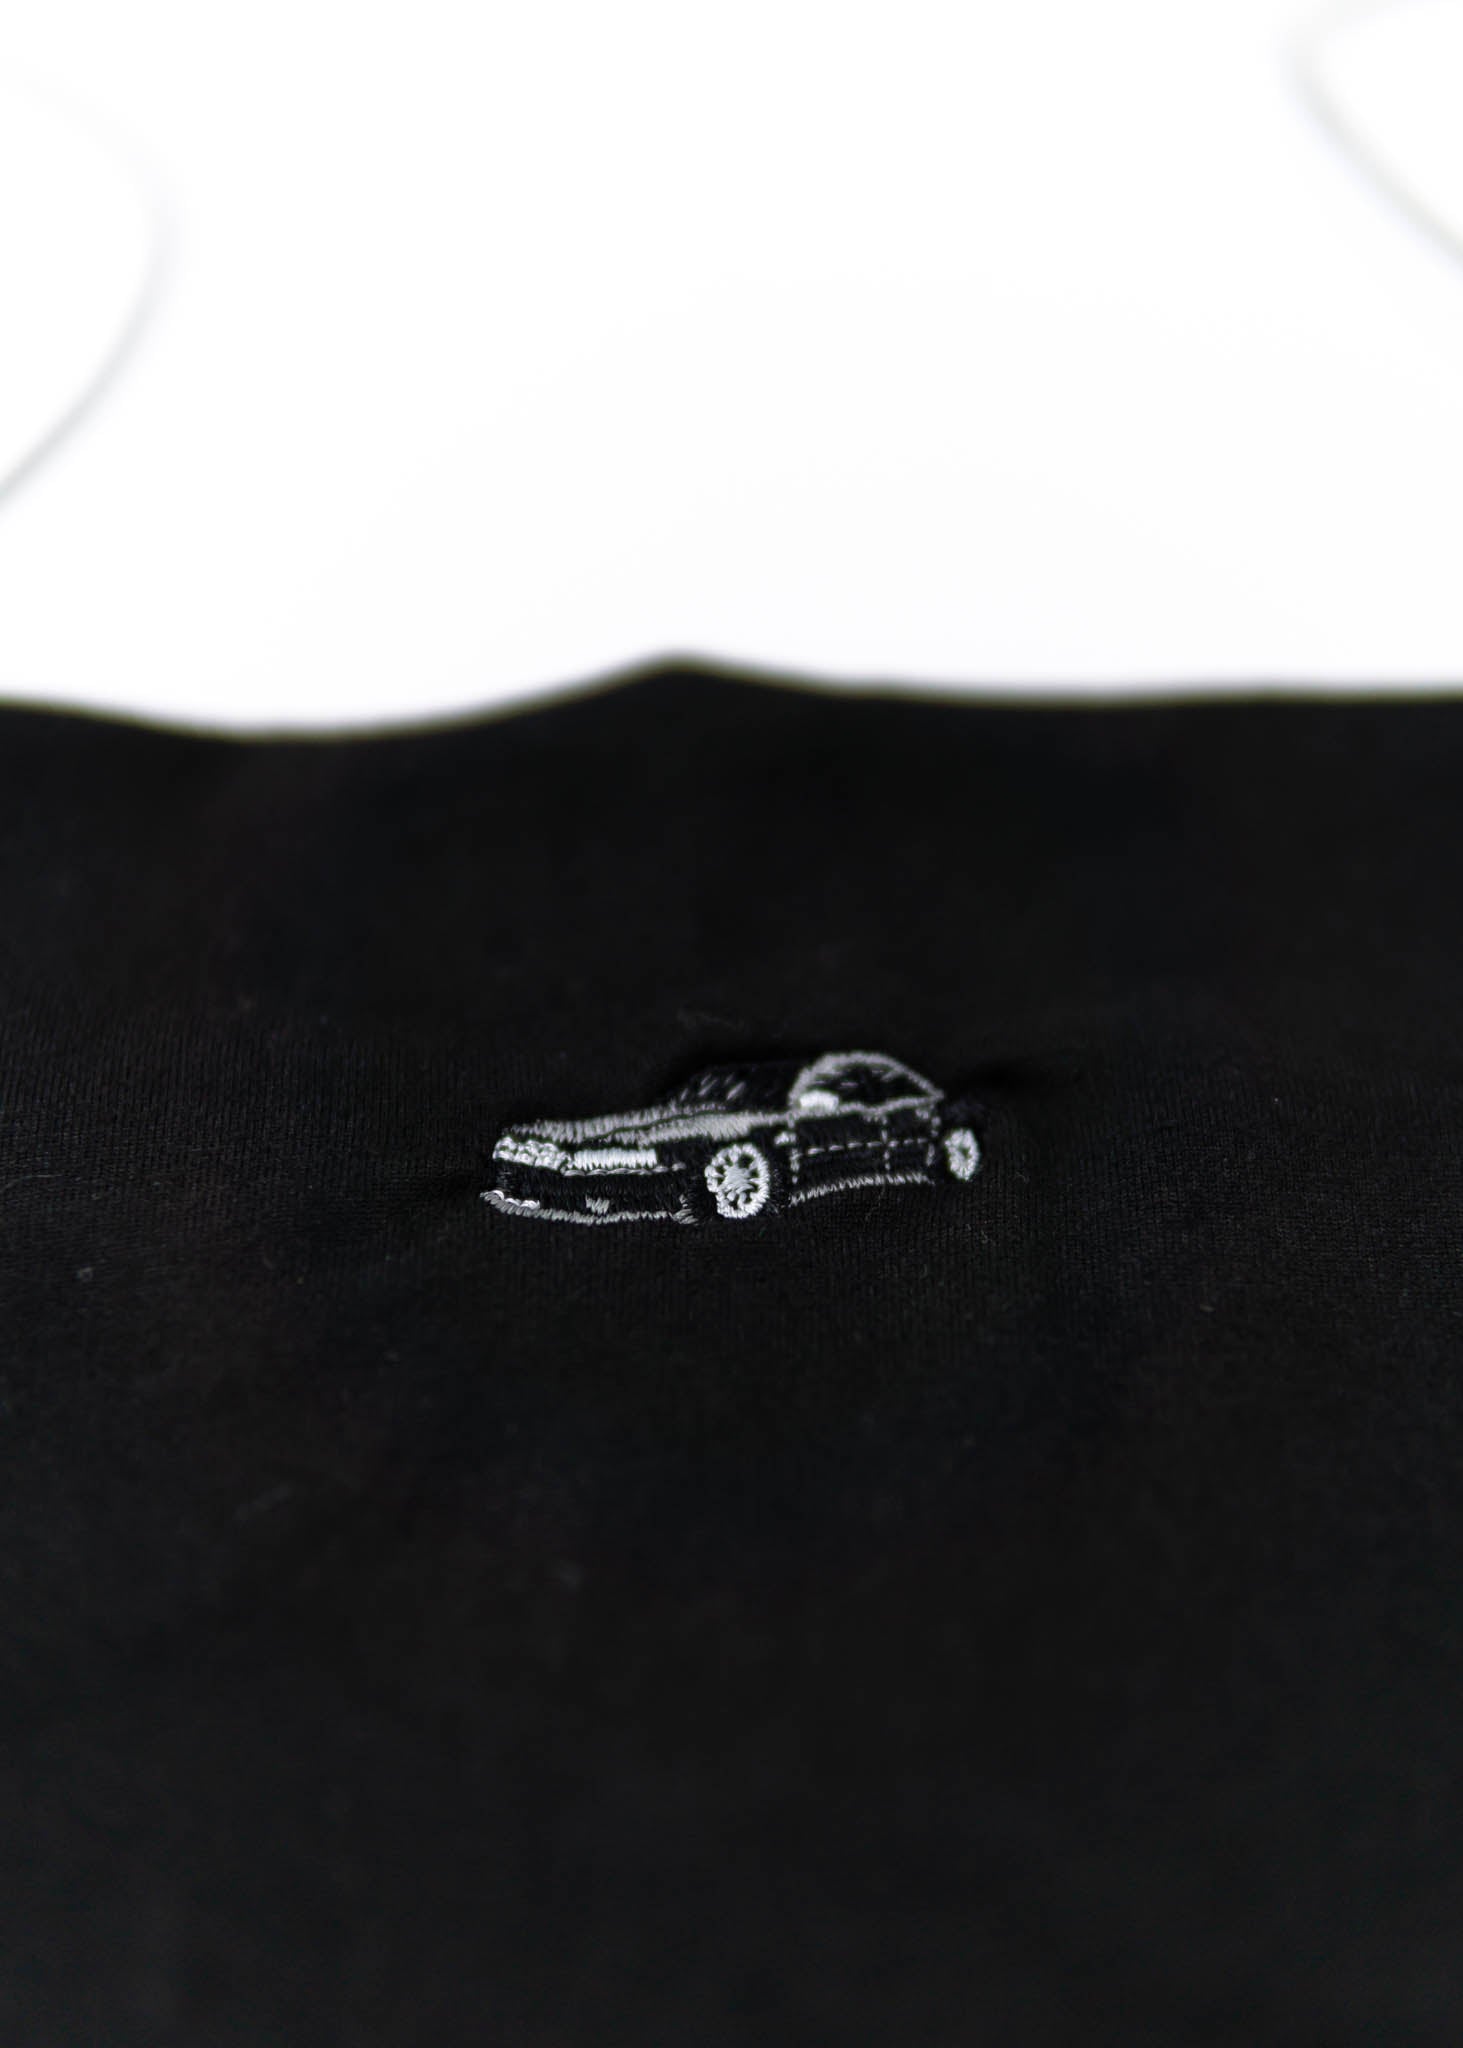 A black Audi crop top for women. Photo is a close up view of the shirt with an embroidered Black Audi D2 S8. Fabric composition is 100% polyester. The material is very soft, comfortable, non-transparent. The style of this shirt is sleeveless, spaghetti straps, with a straight neckline.